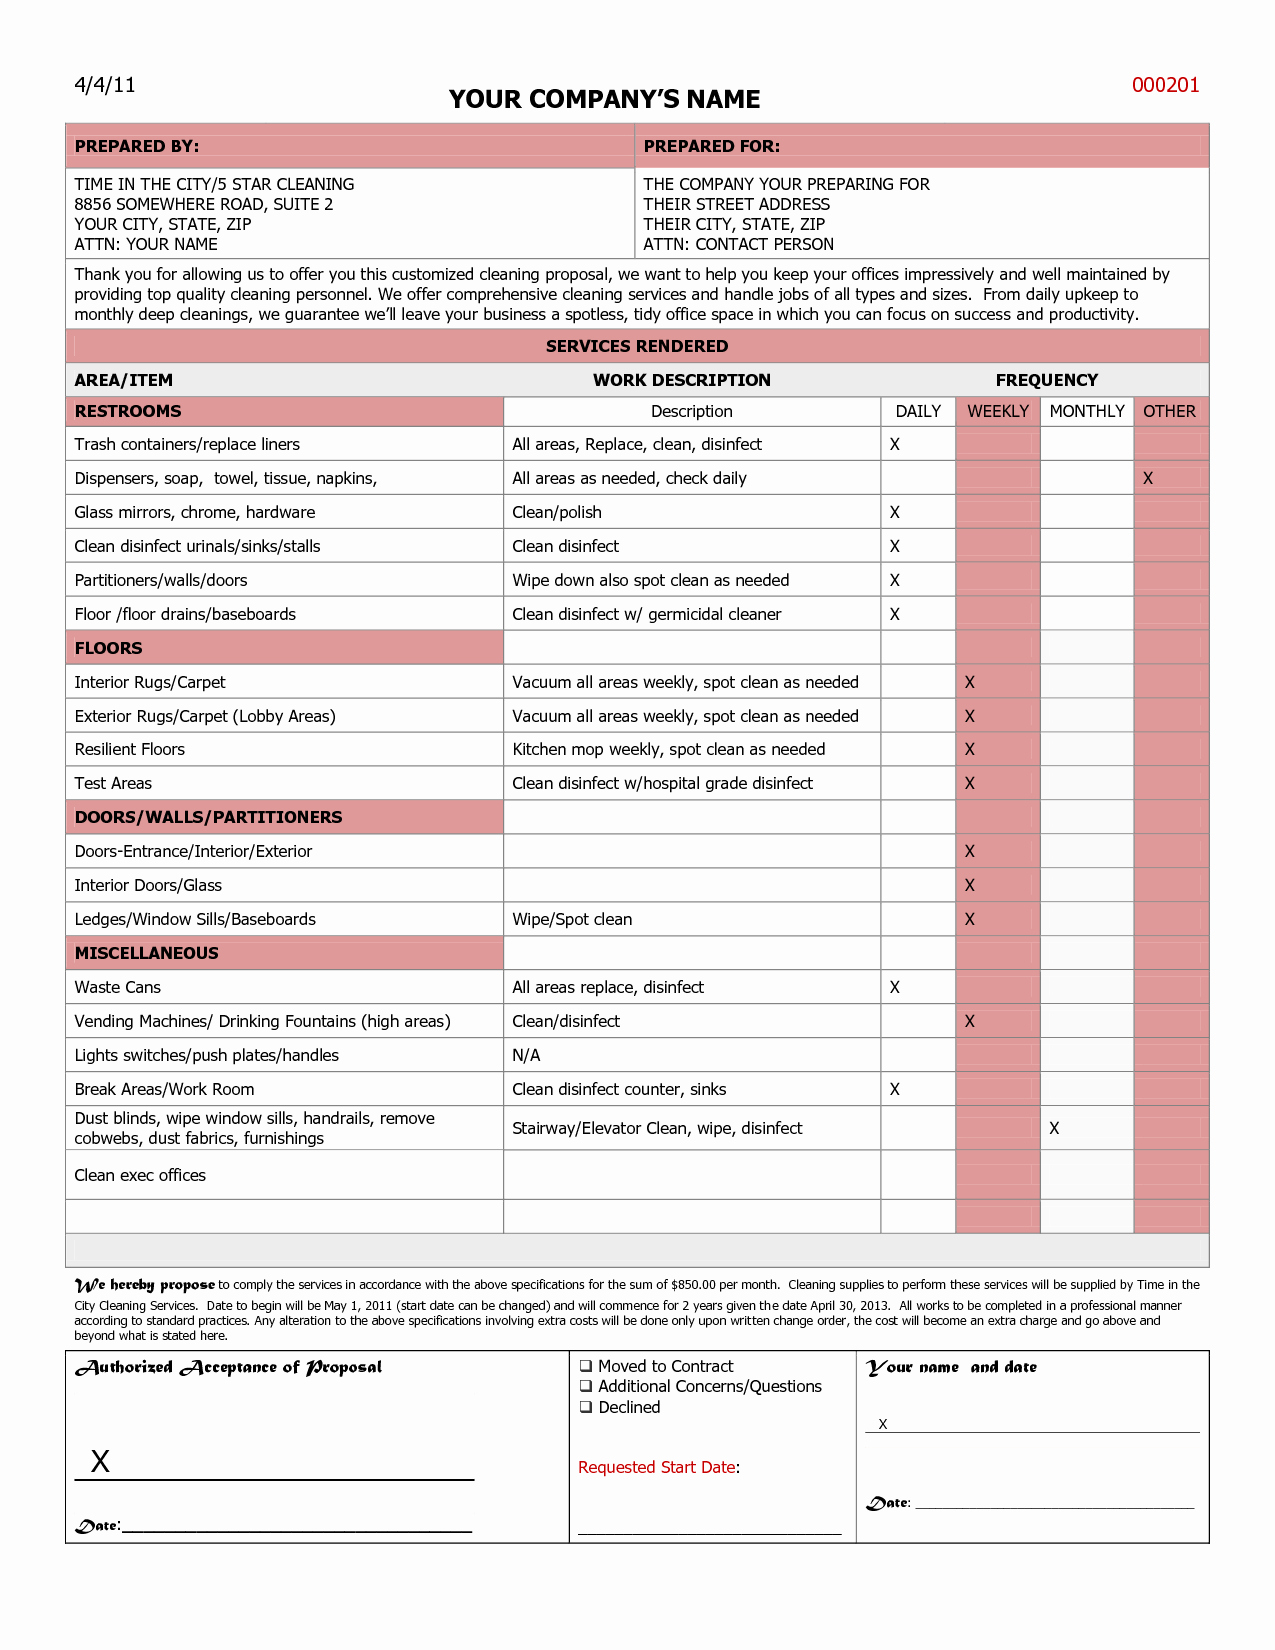 Cleaning Bid Proposal Template Inspirational Janitorial Bid Proposal Template